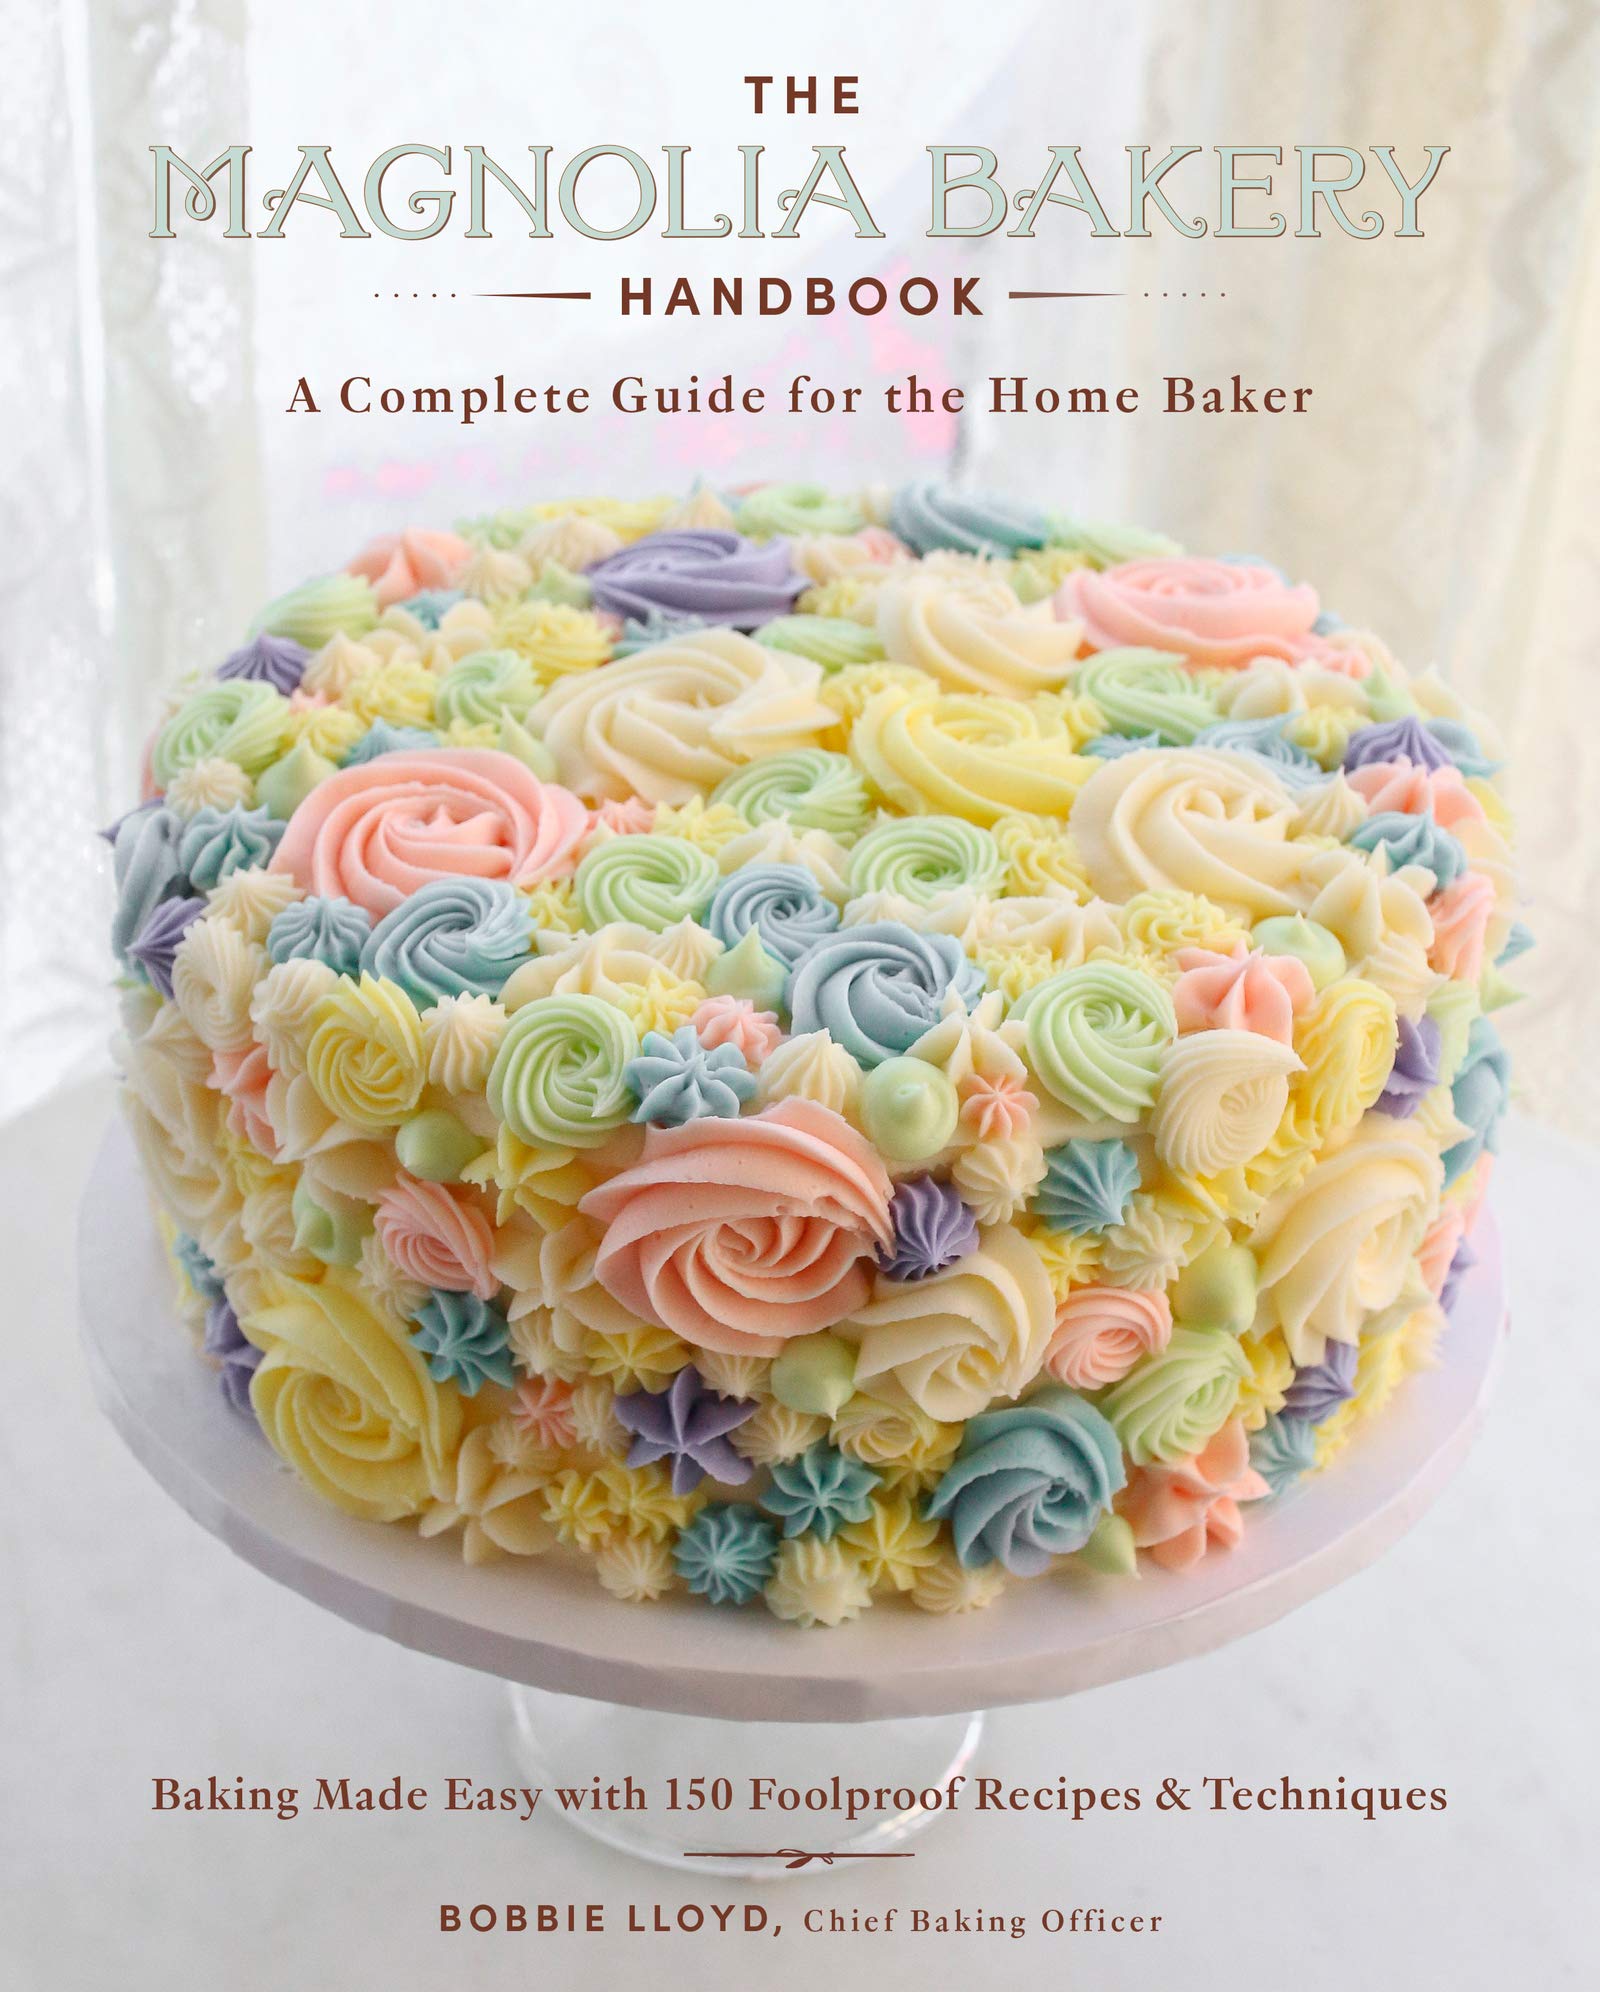 The Magnolia Bakery Handbook: A Complete Guide for the Home Baker (Bobbie Lloyd)